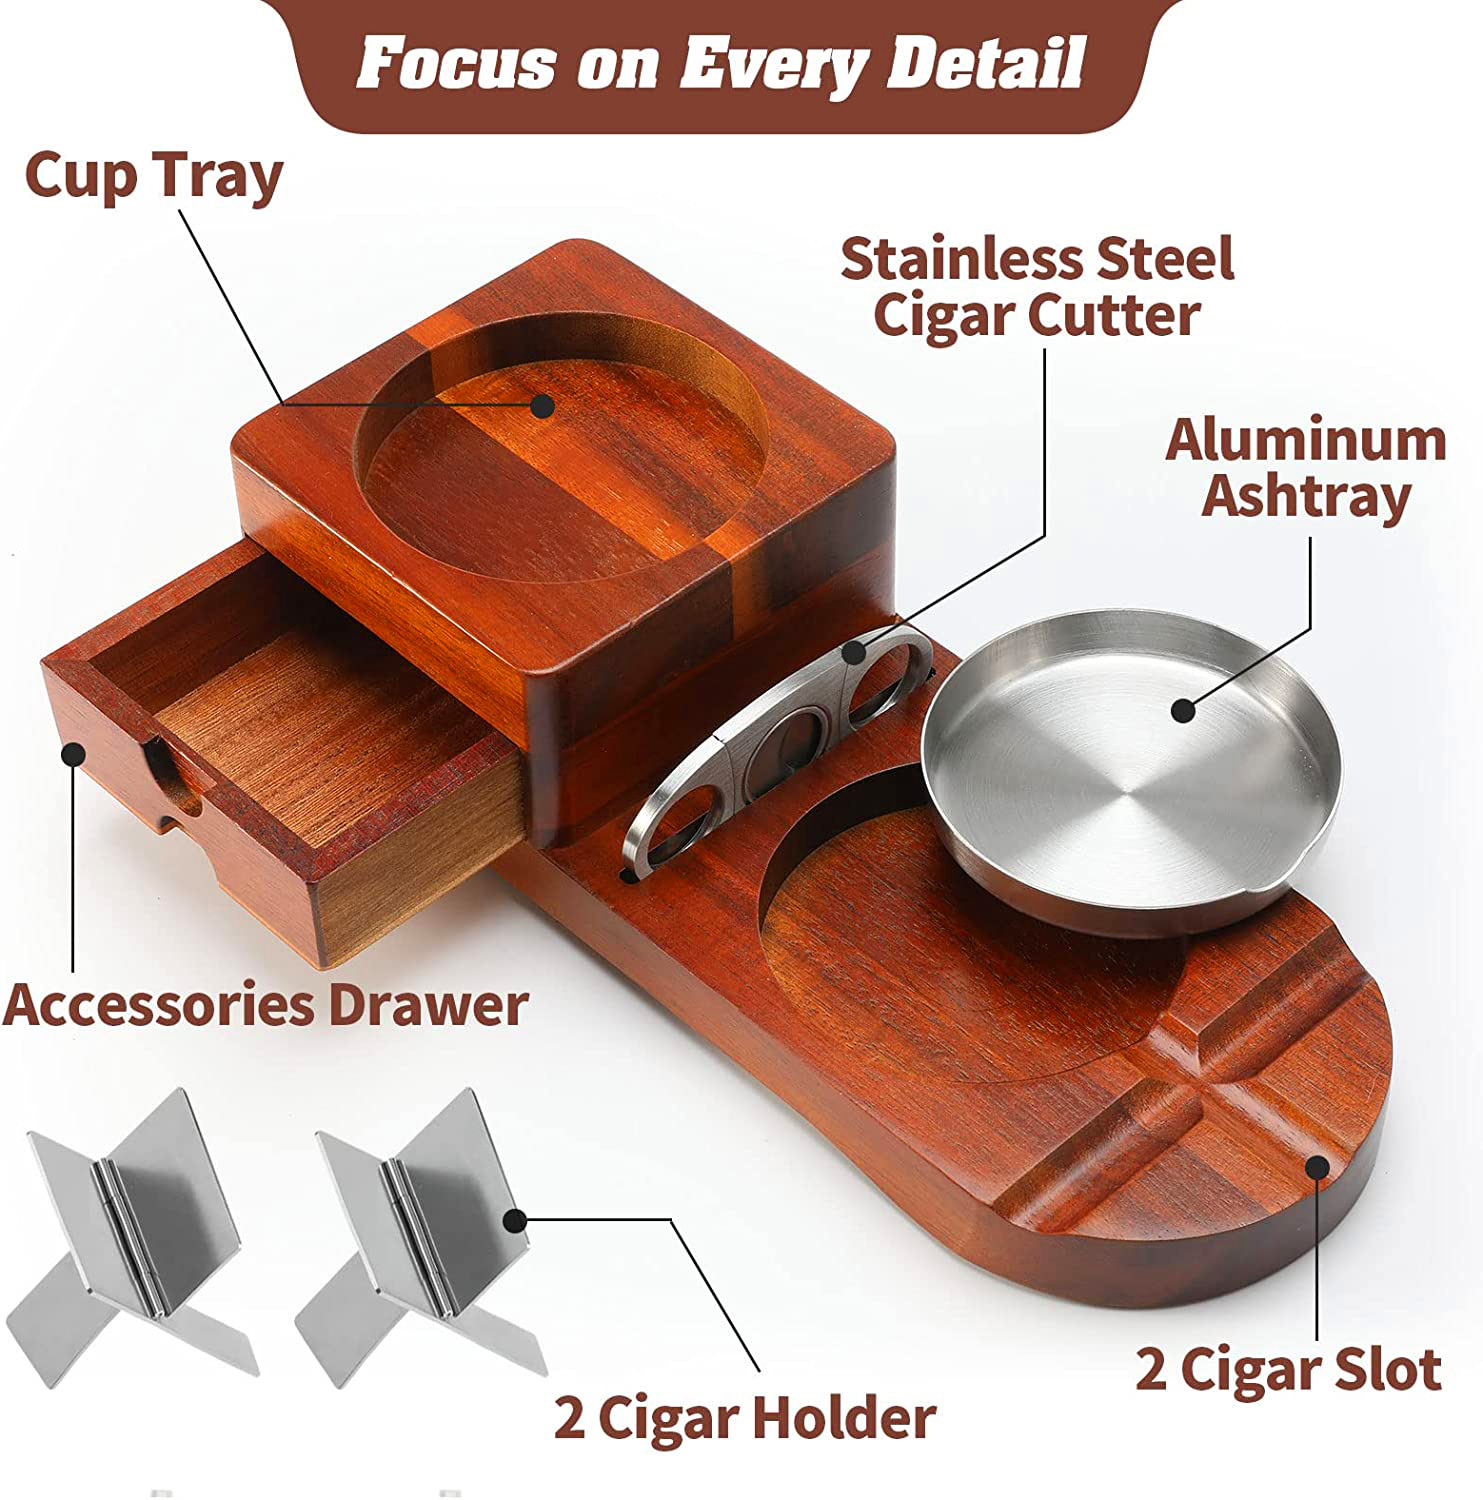 Deluxe Cigar Ashtray Set with 2 Stainless Cigar Steel Holders,Cigar Cutter, and Cigar accessories Drawer - Perfect Cigar Accessories for Men